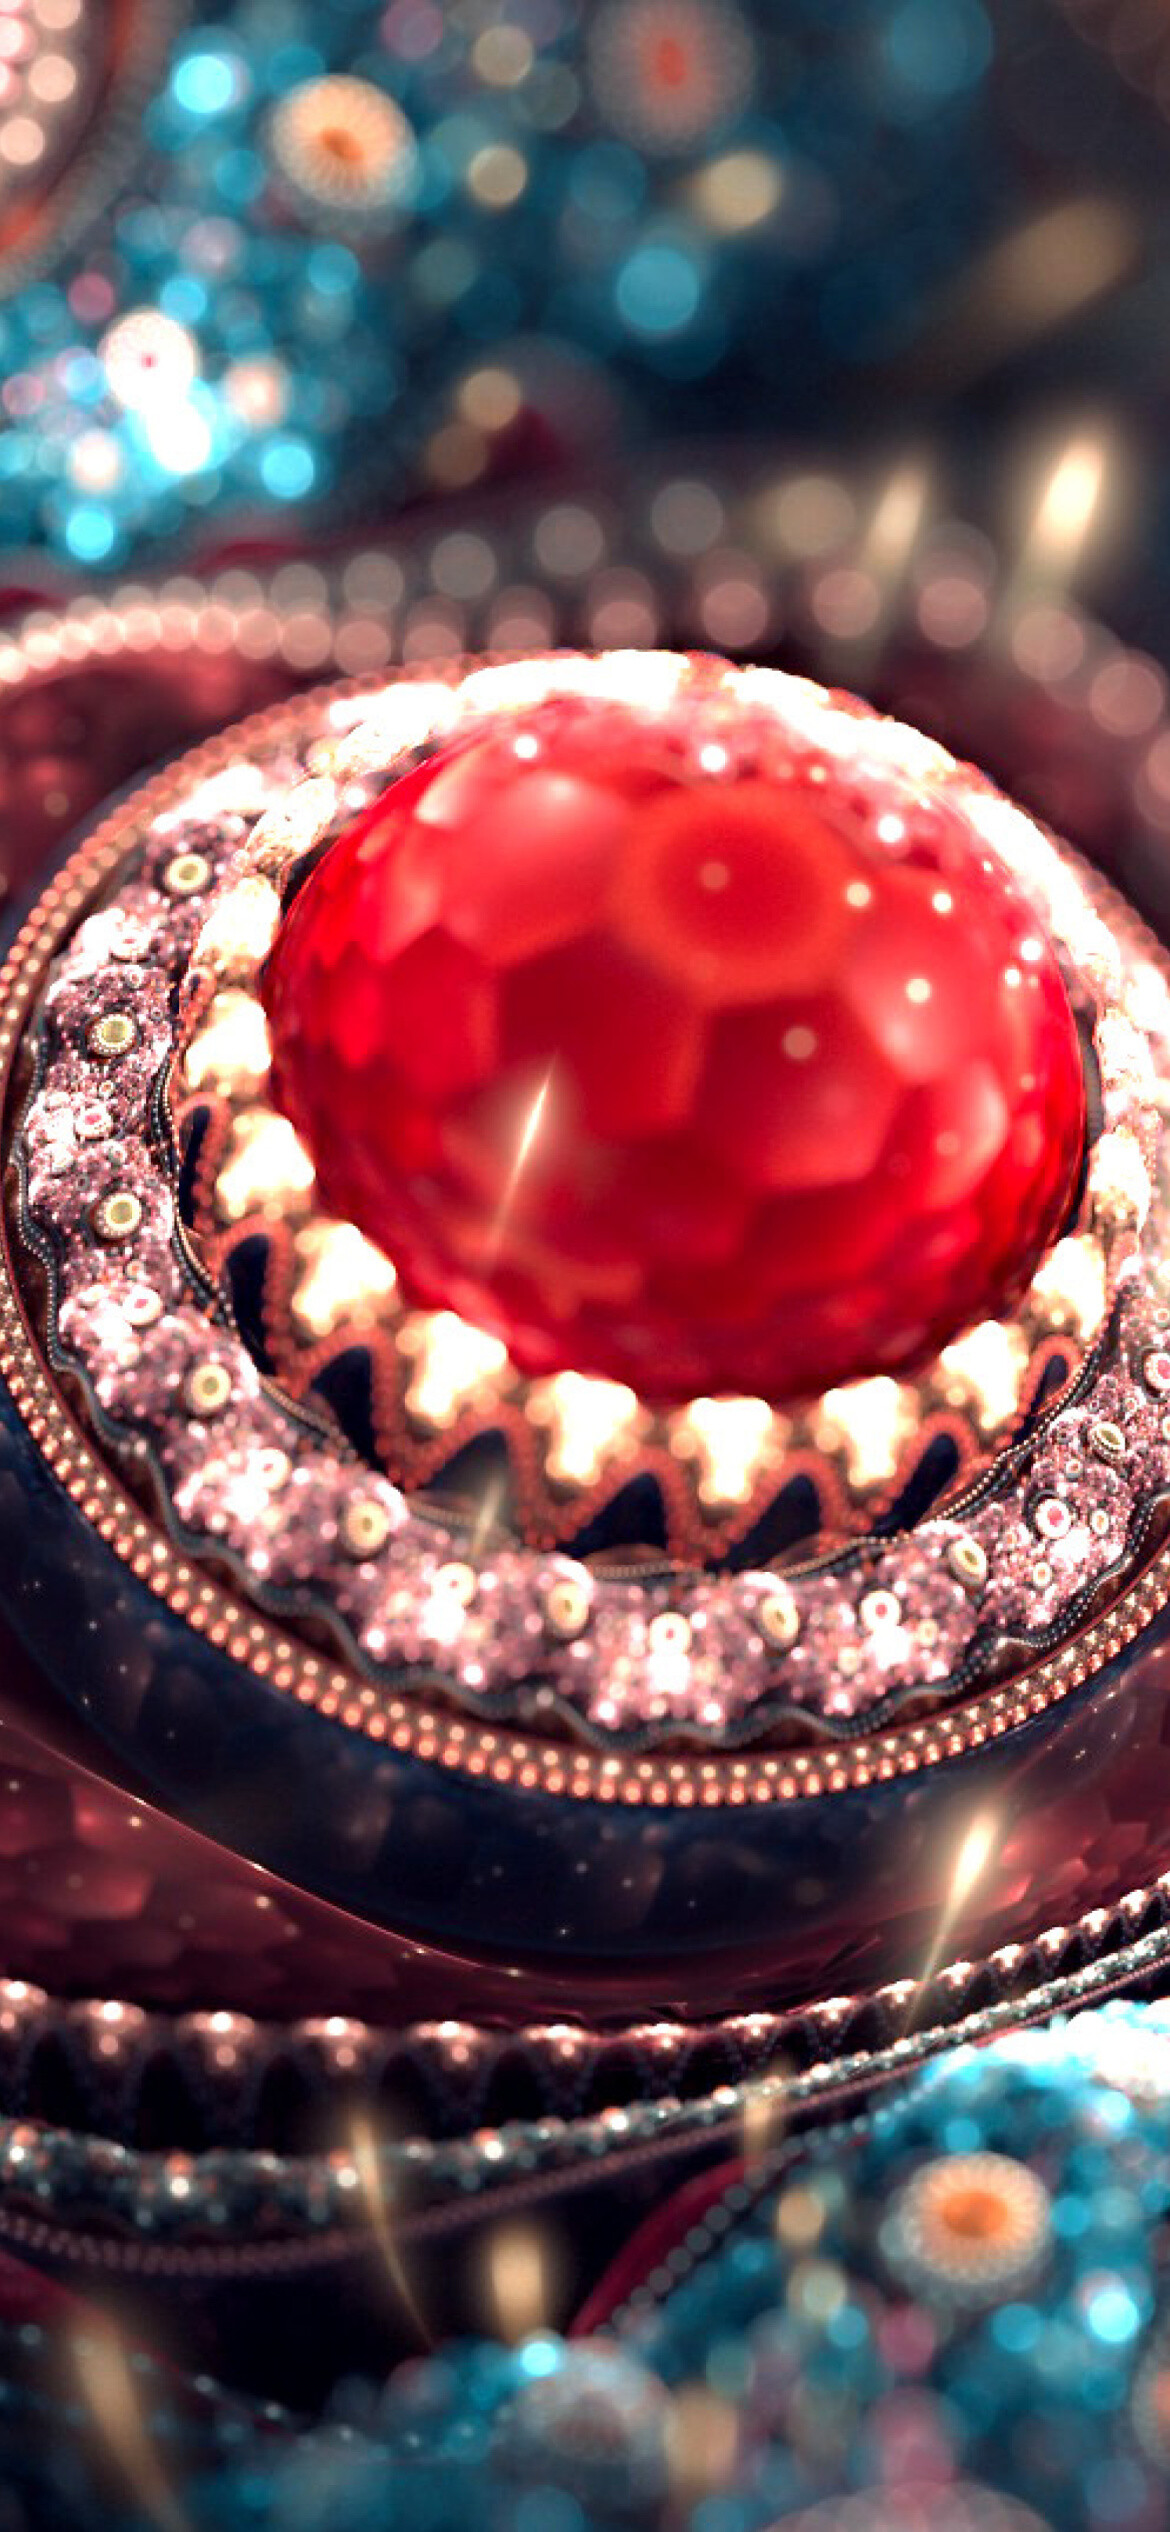 Jewels: Precious stone, A gem distinguished for its beauty and rarity. 1170x2540 HD Wallpaper.